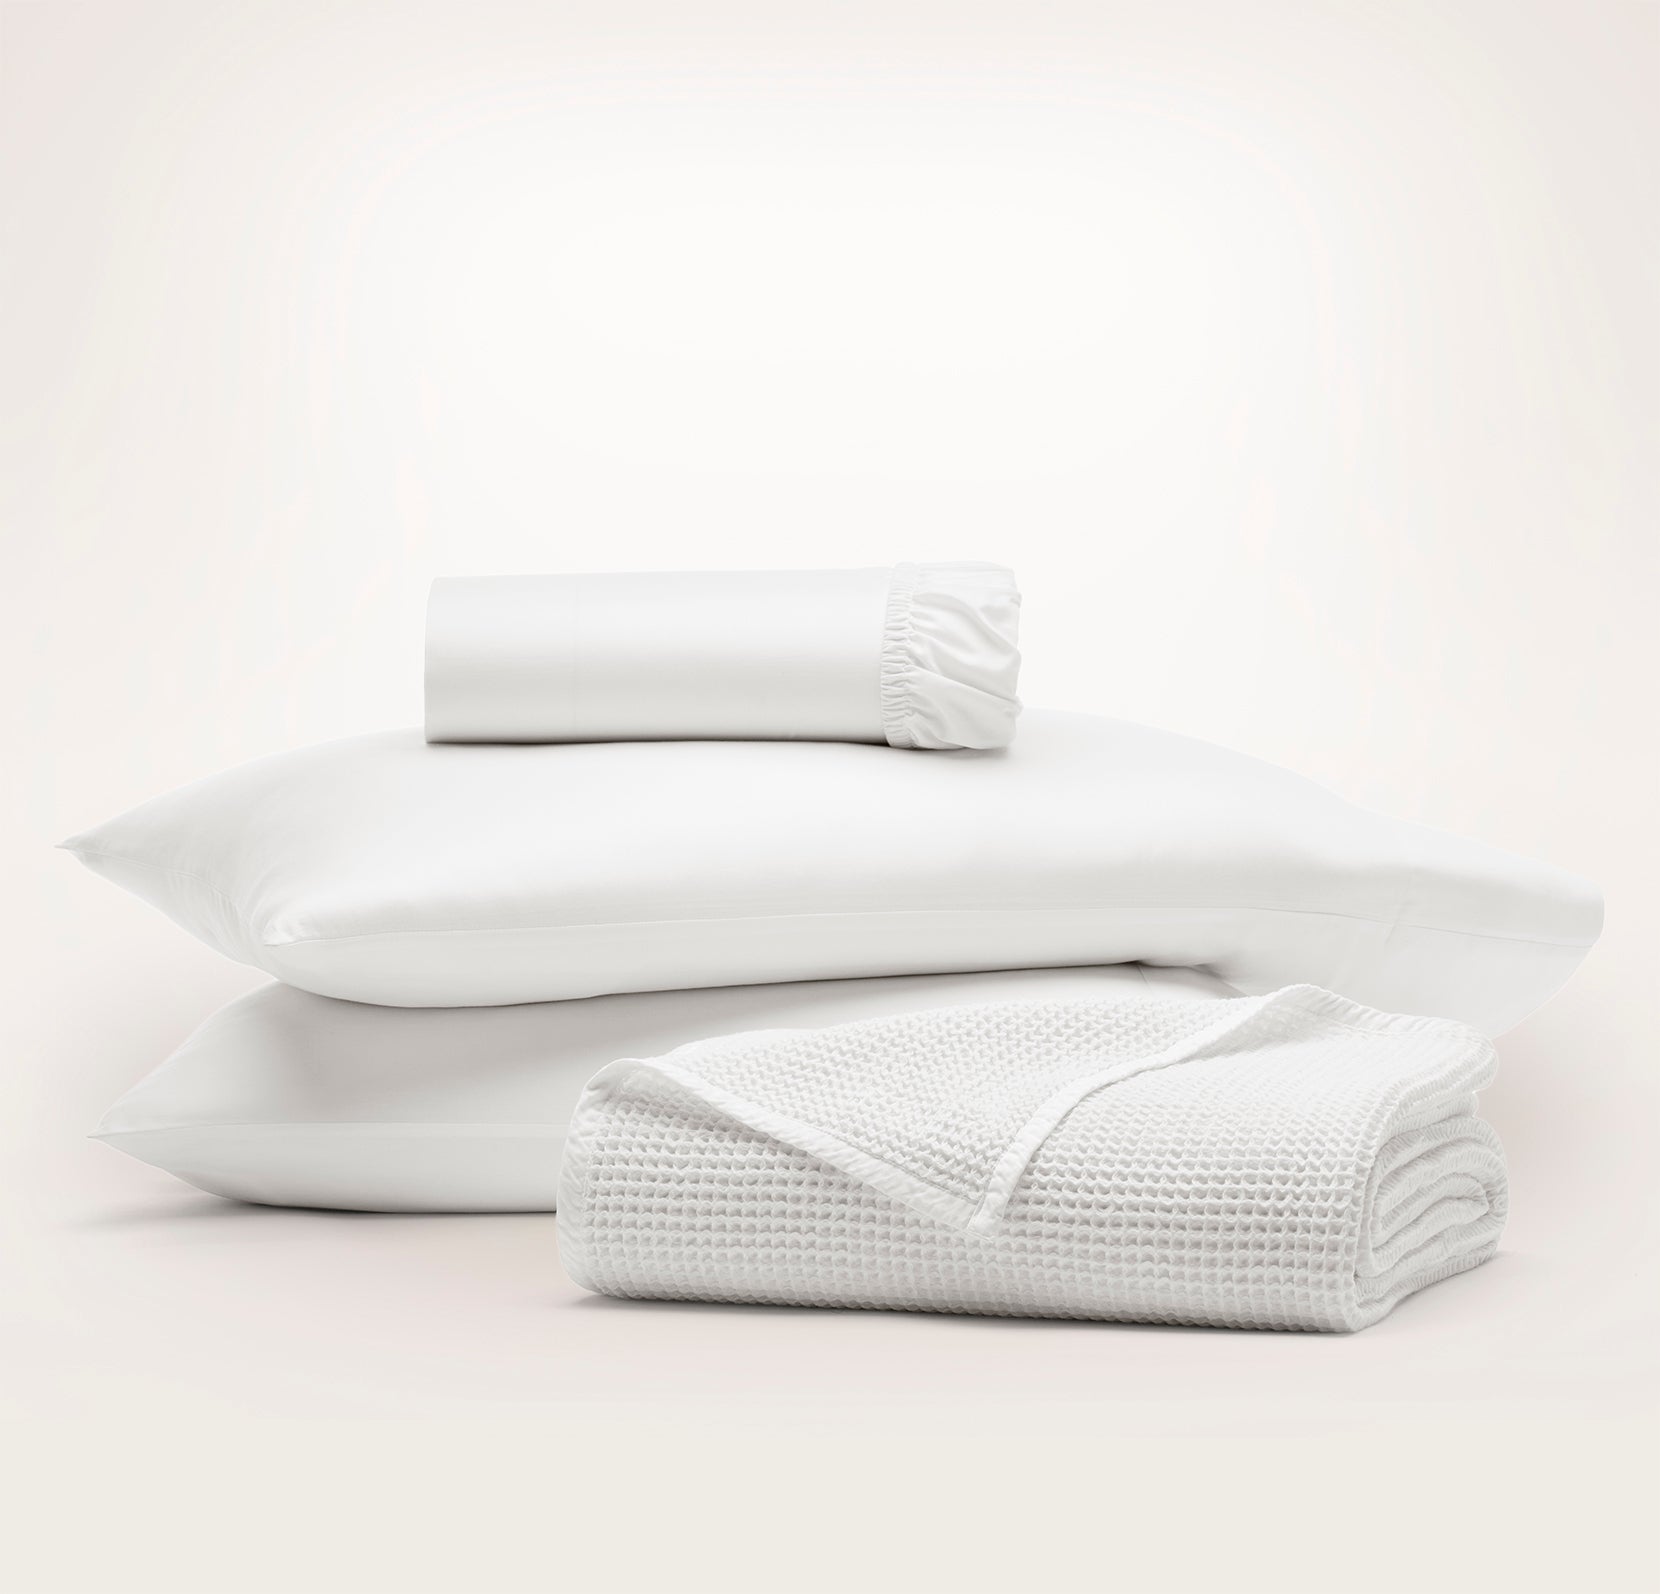 Boll & Branch: Save 20% on luxe sheets, towels and more